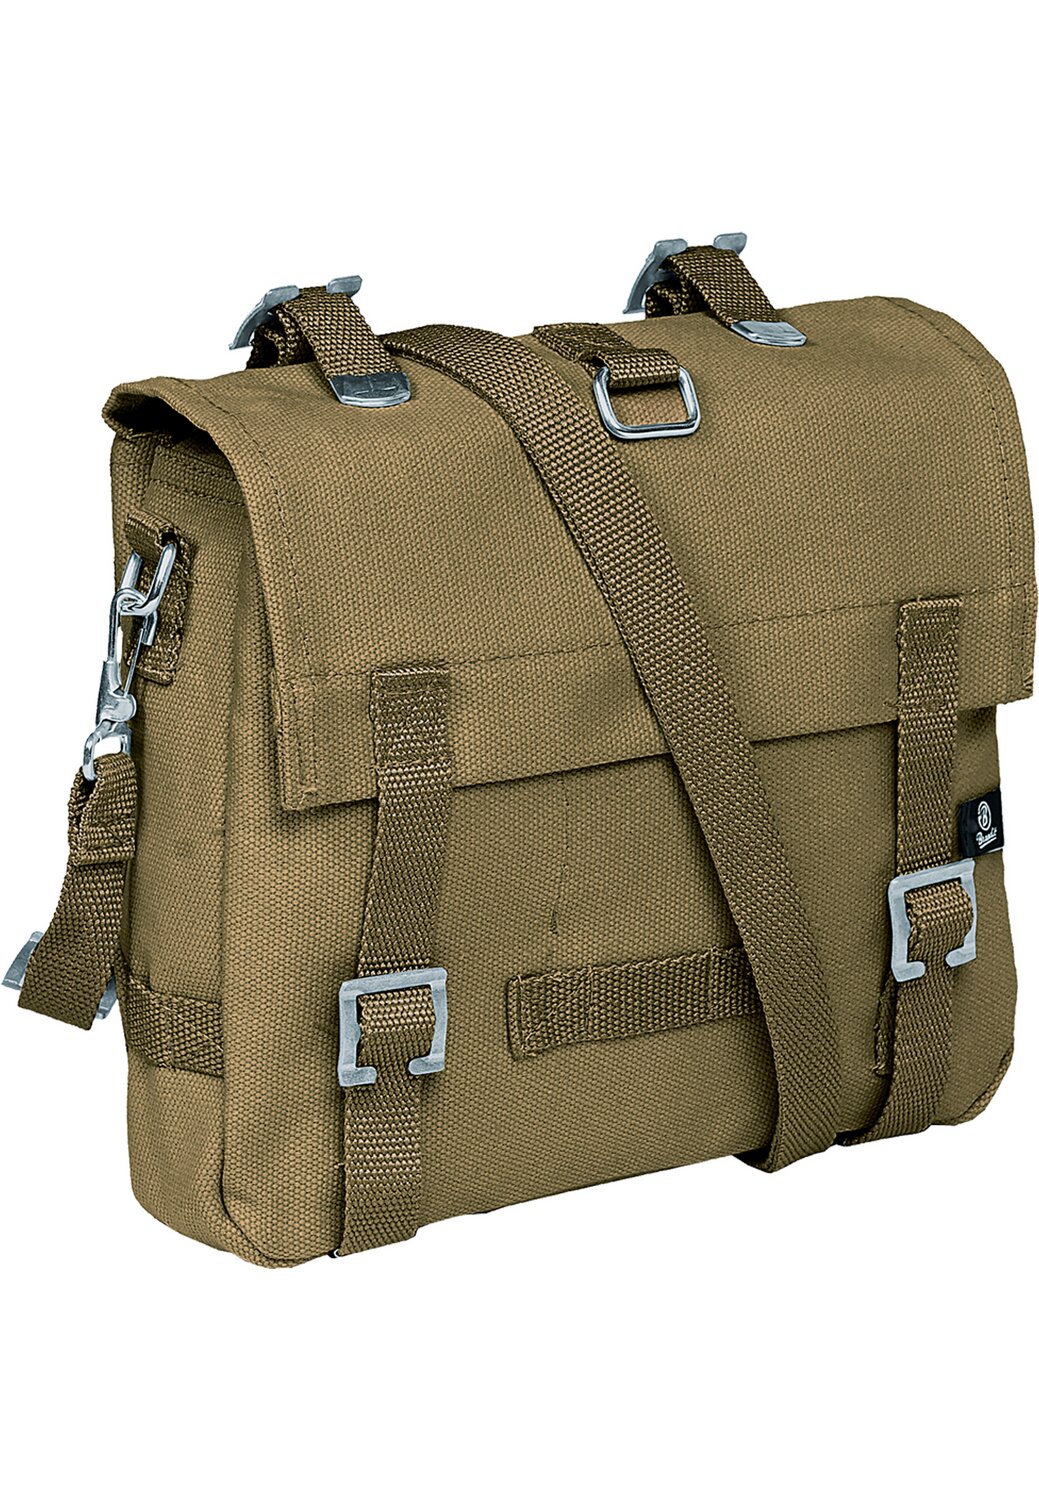 Bag Brandit one olive size MAXISCOOT | Military small